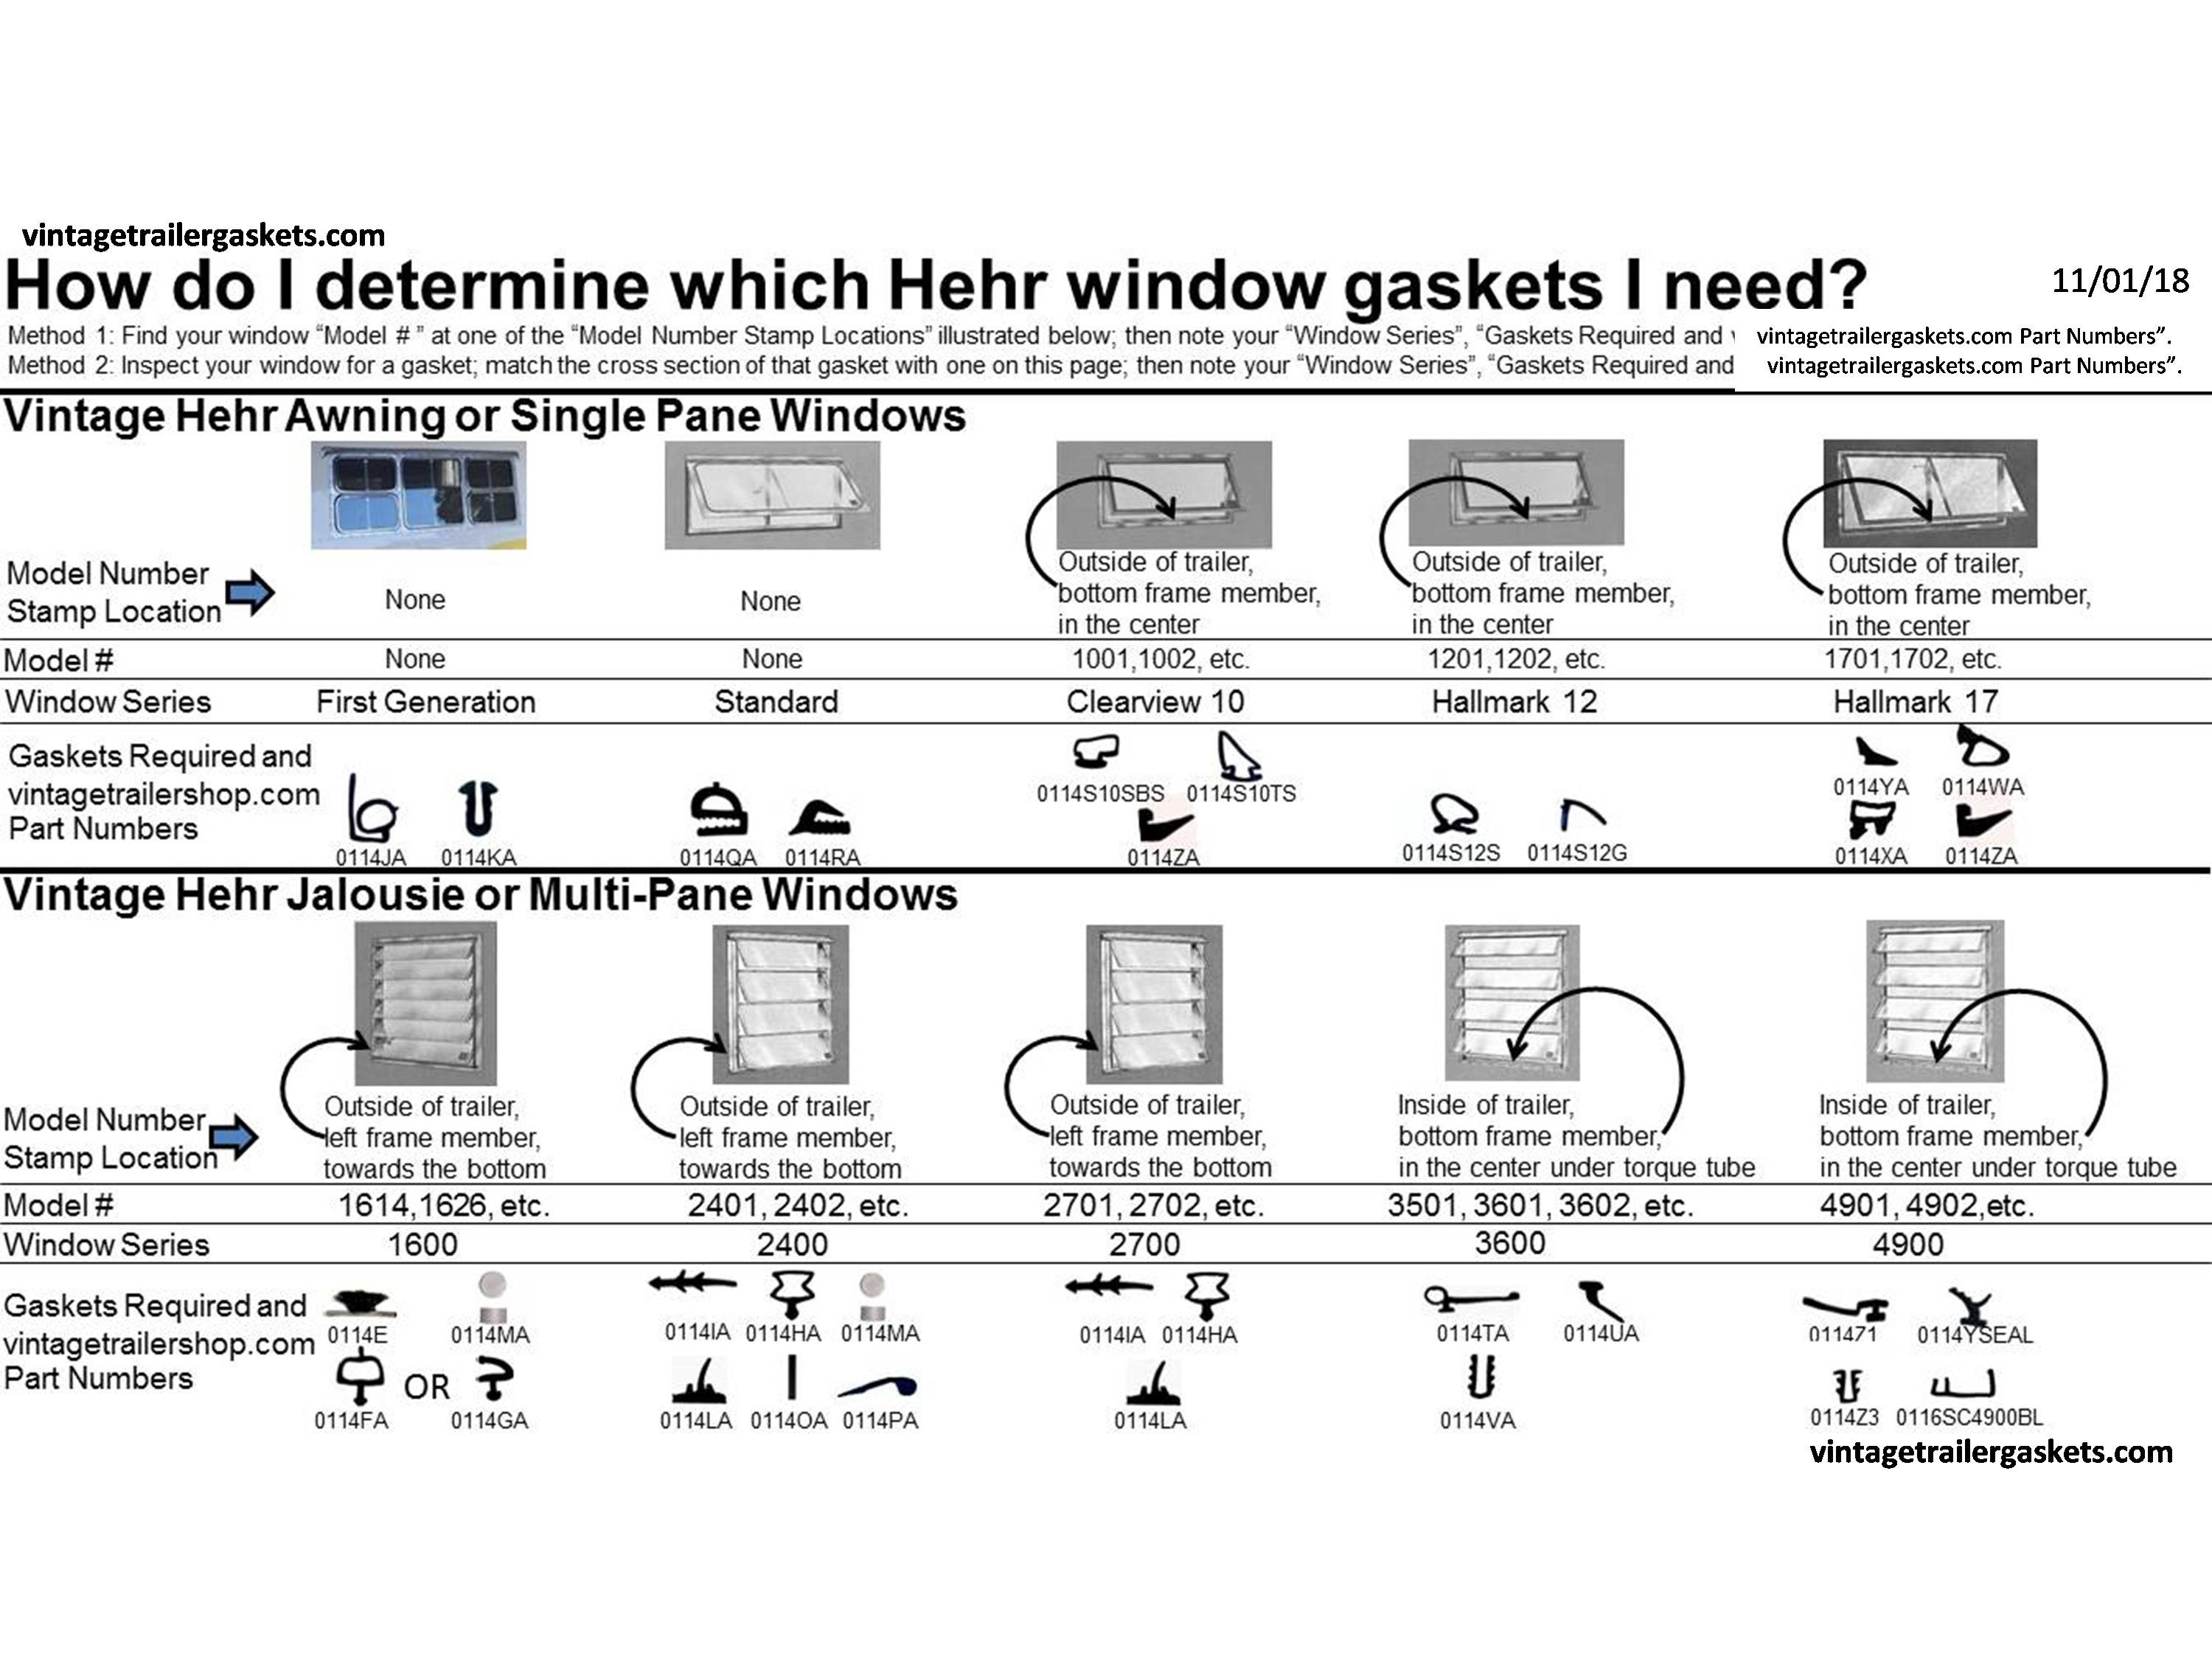 How to Determine Which Hehr Gaskets I Need.